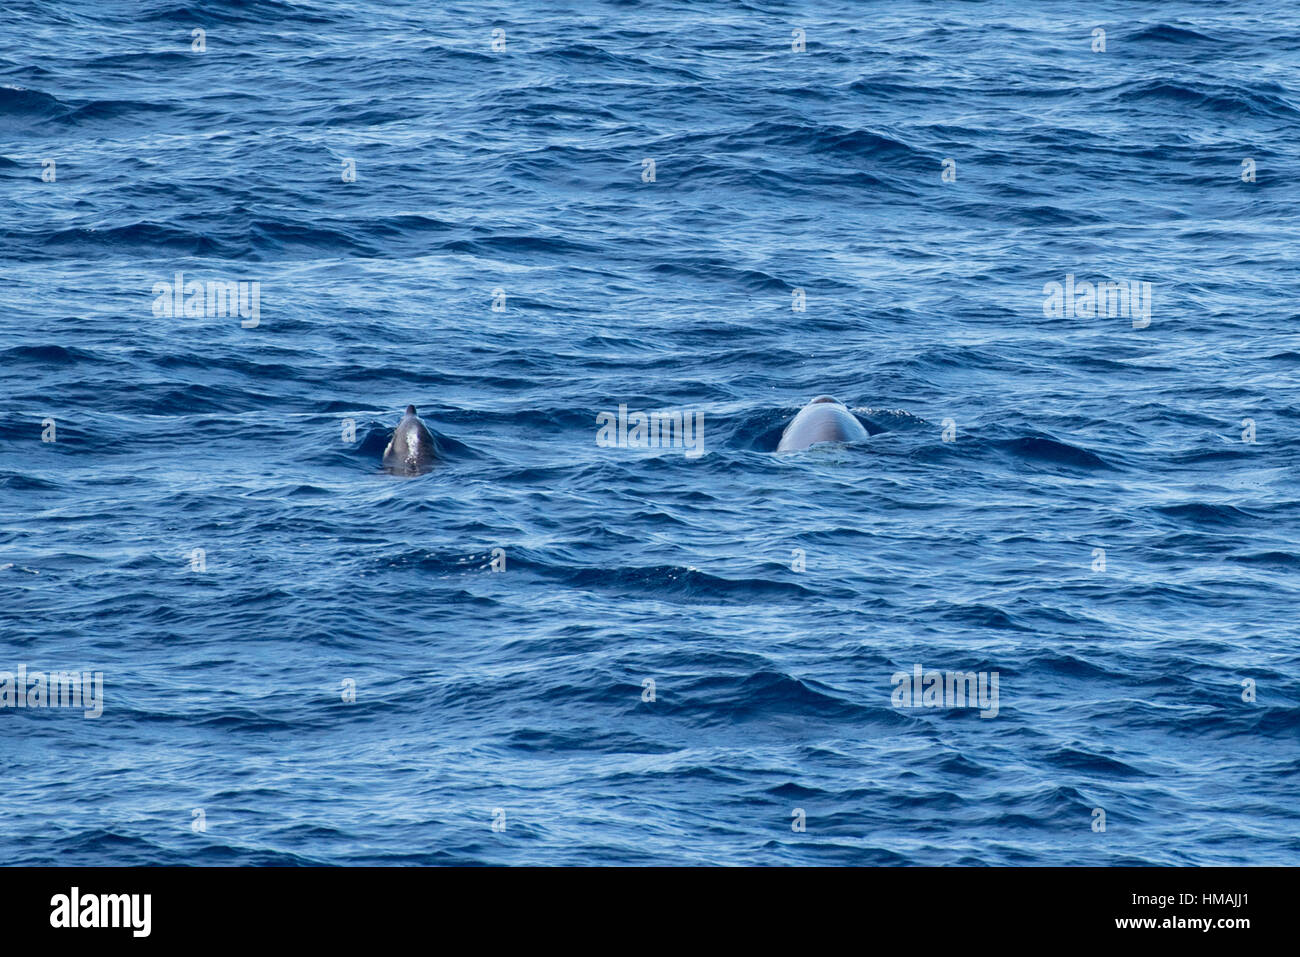 Adult female and juvenile Gervais' beaked whales, Mesoplodon europaeus, surfacing, off Morocco, Atlantic Ocean Stock Photo